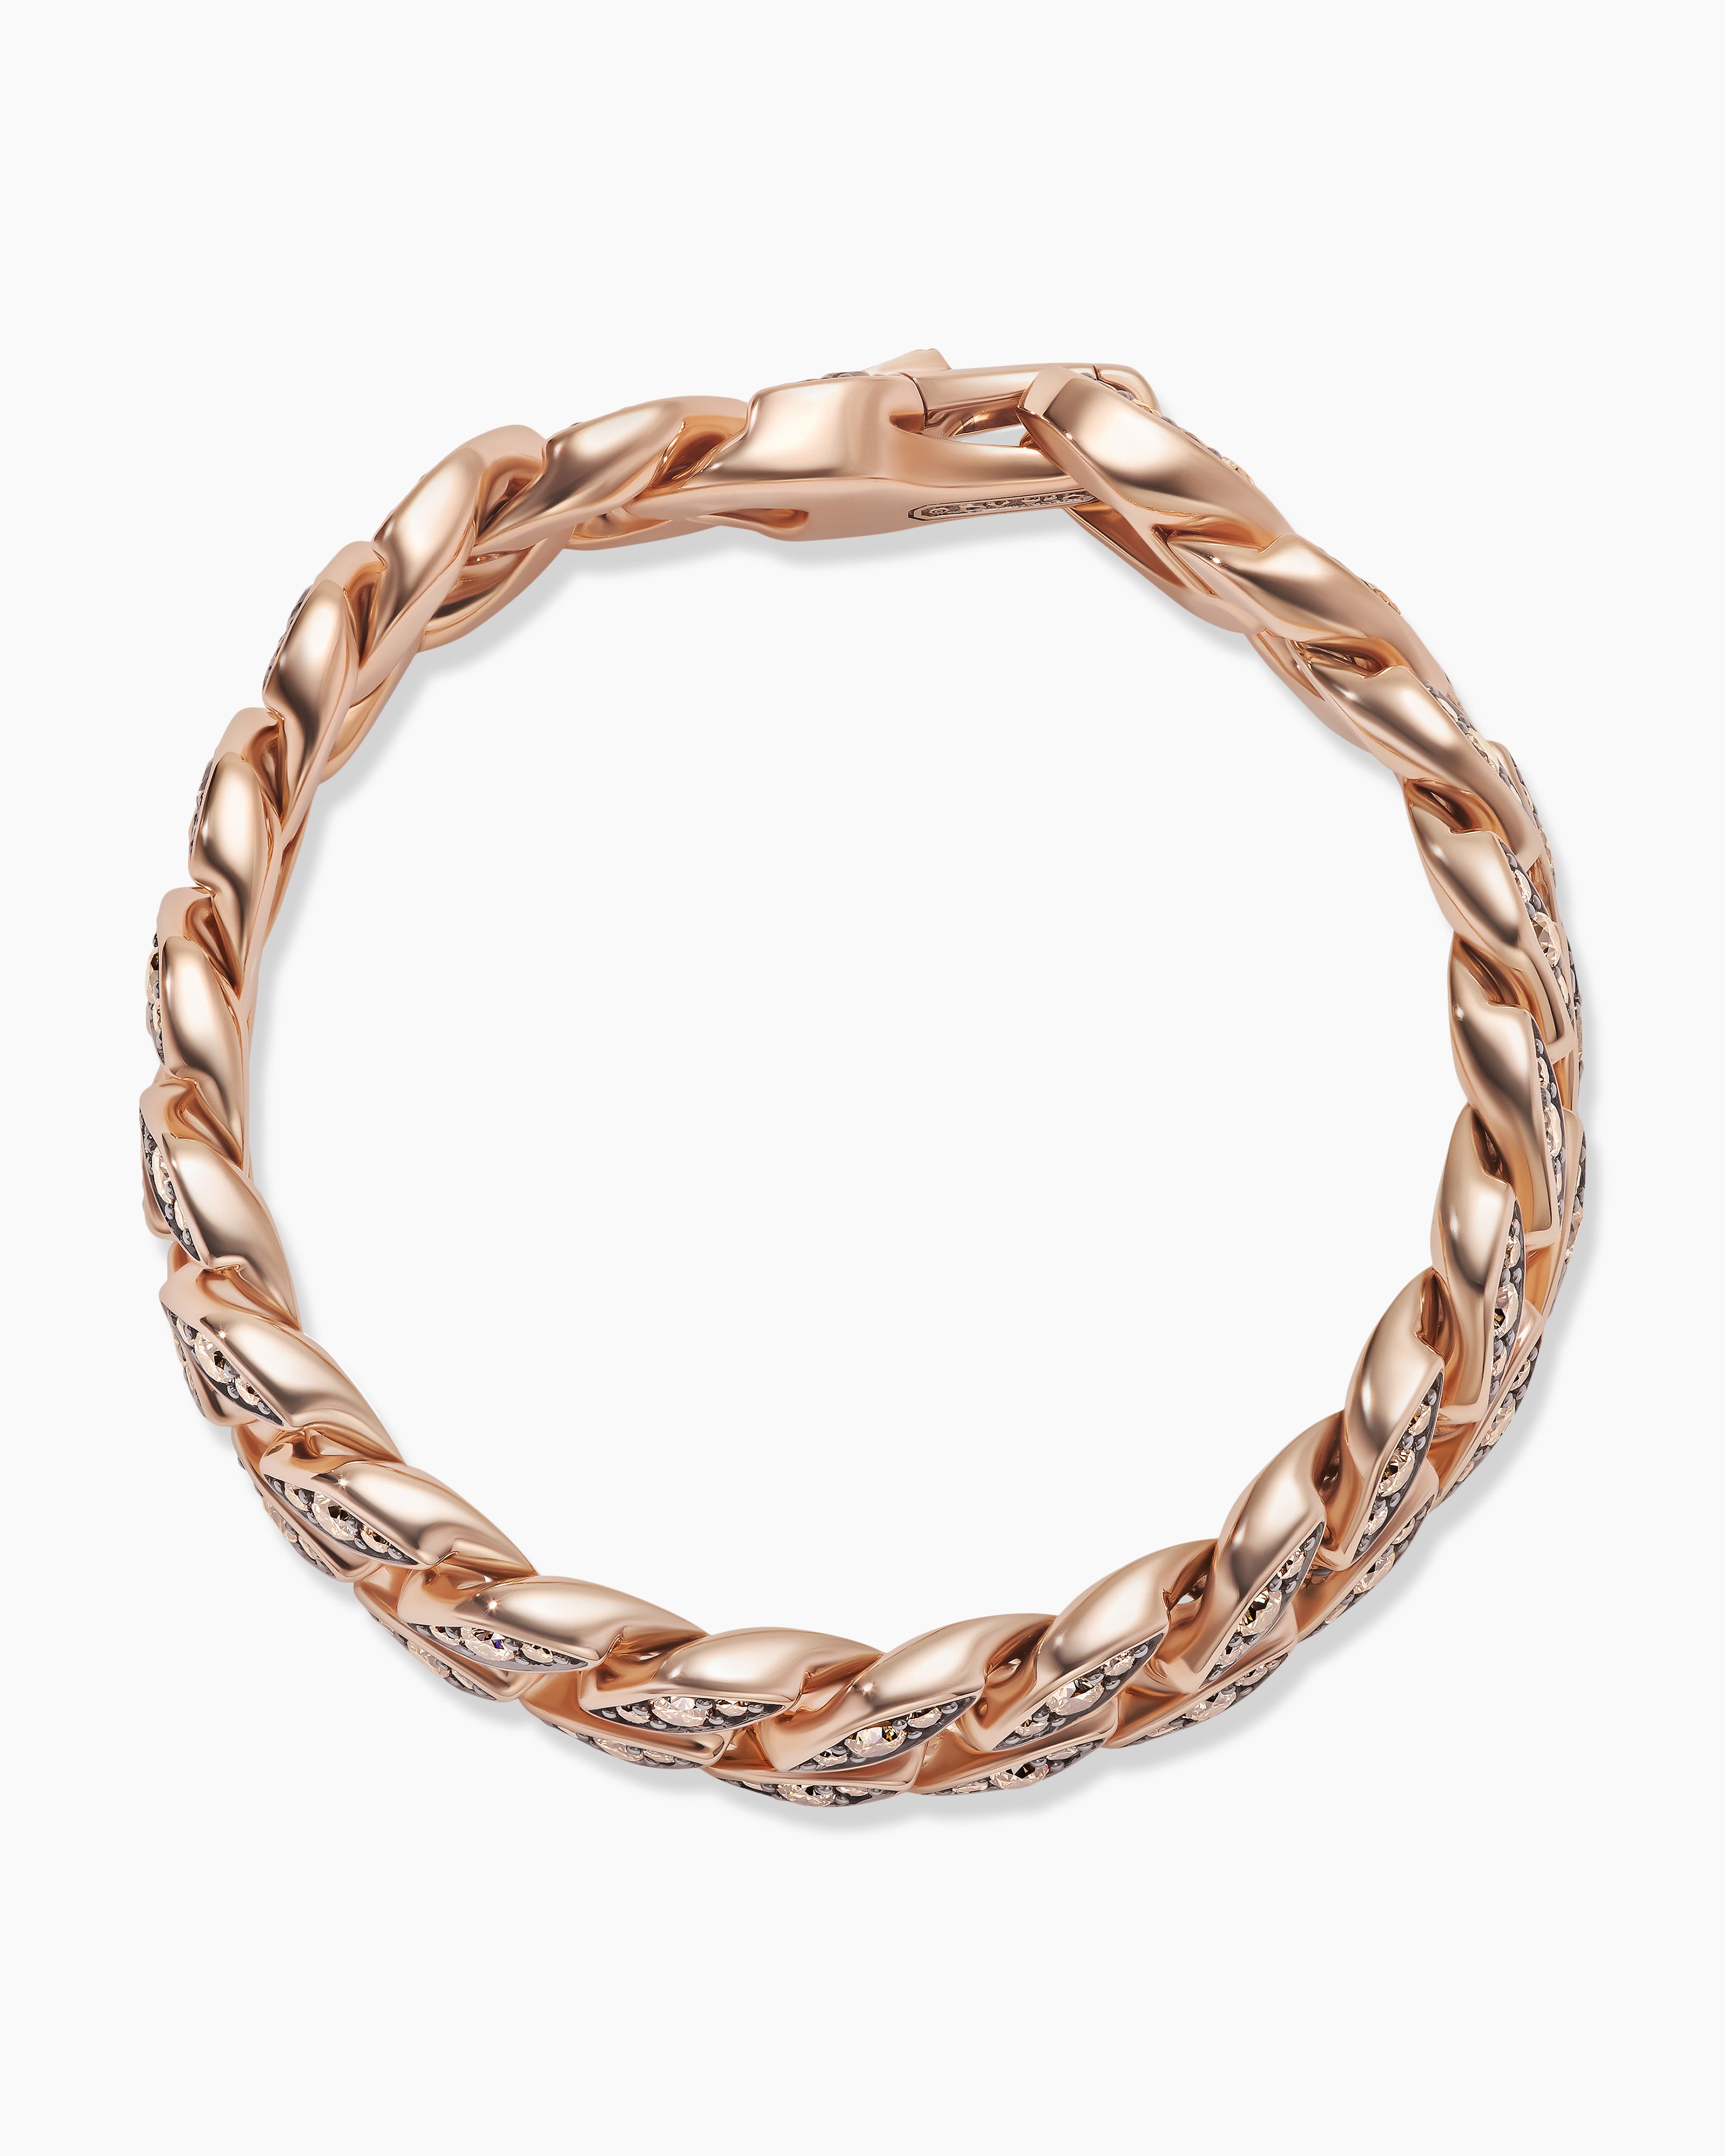 Buy the Rose Gold Flash-Pin Bracelet - Silberry